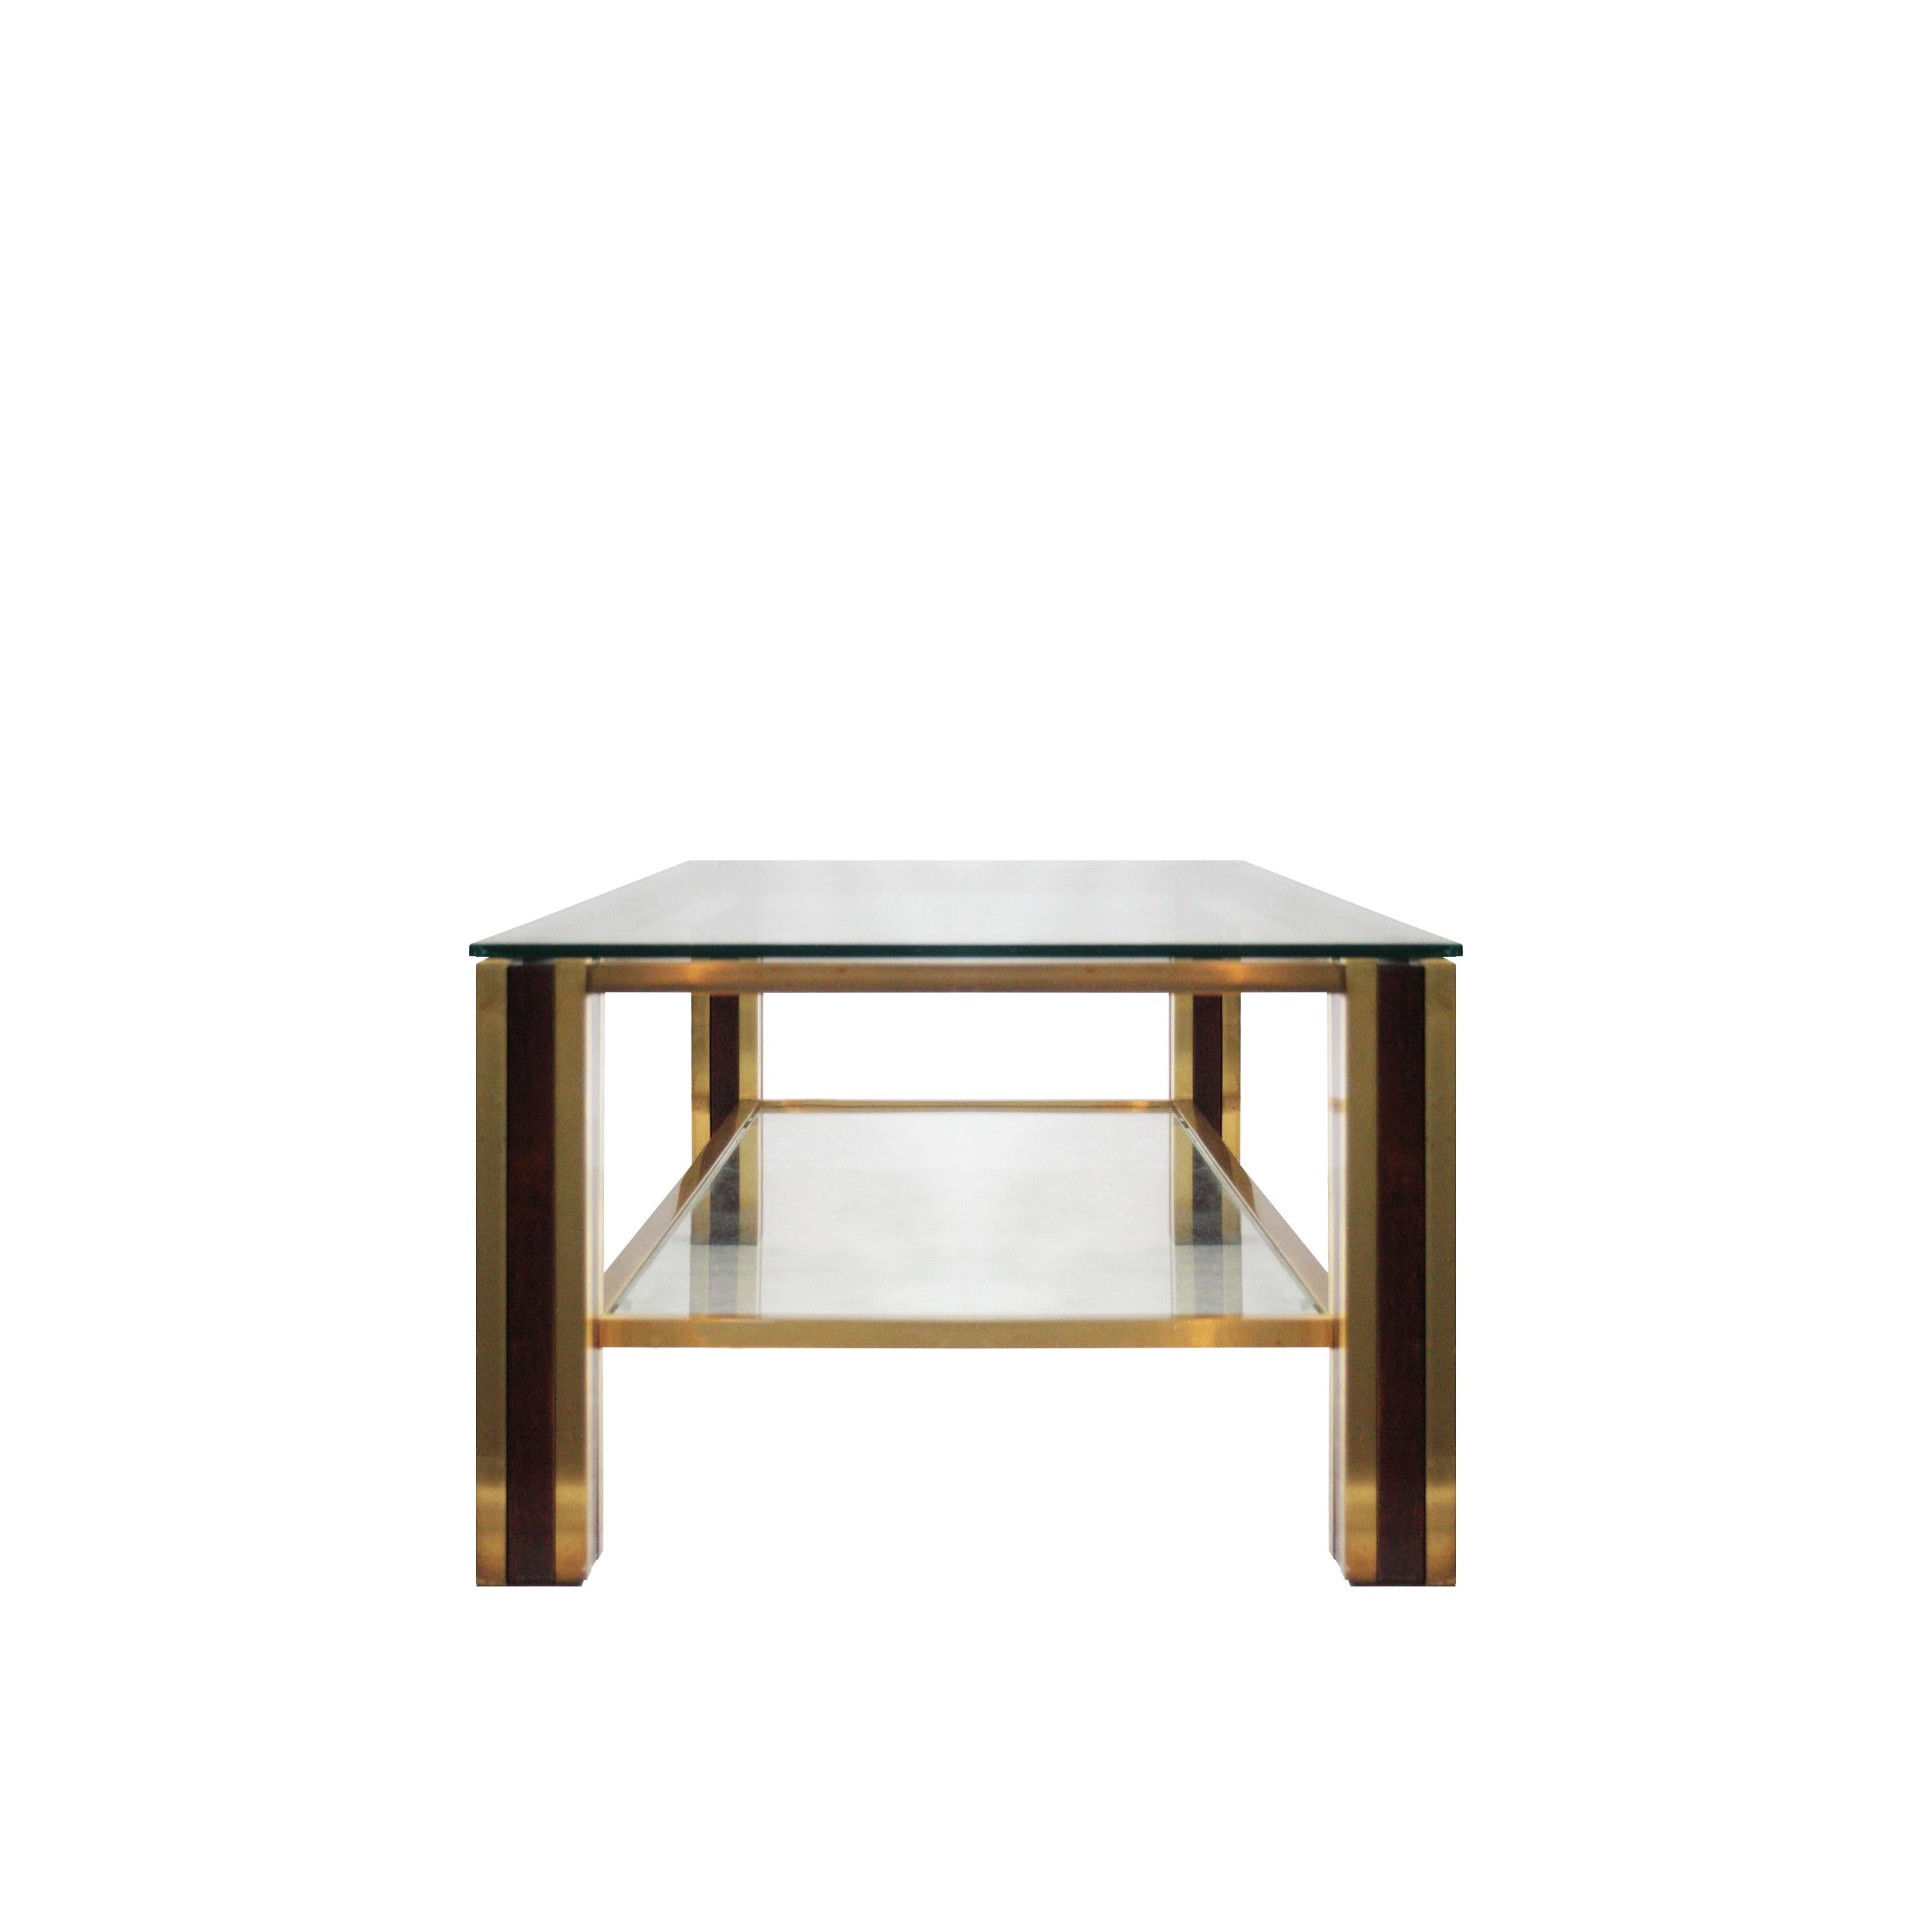 MidCentury Modern Table with Brass and Solid Walnut Wood Structure, France, 1970 In Good Condition For Sale In Madrid, ES